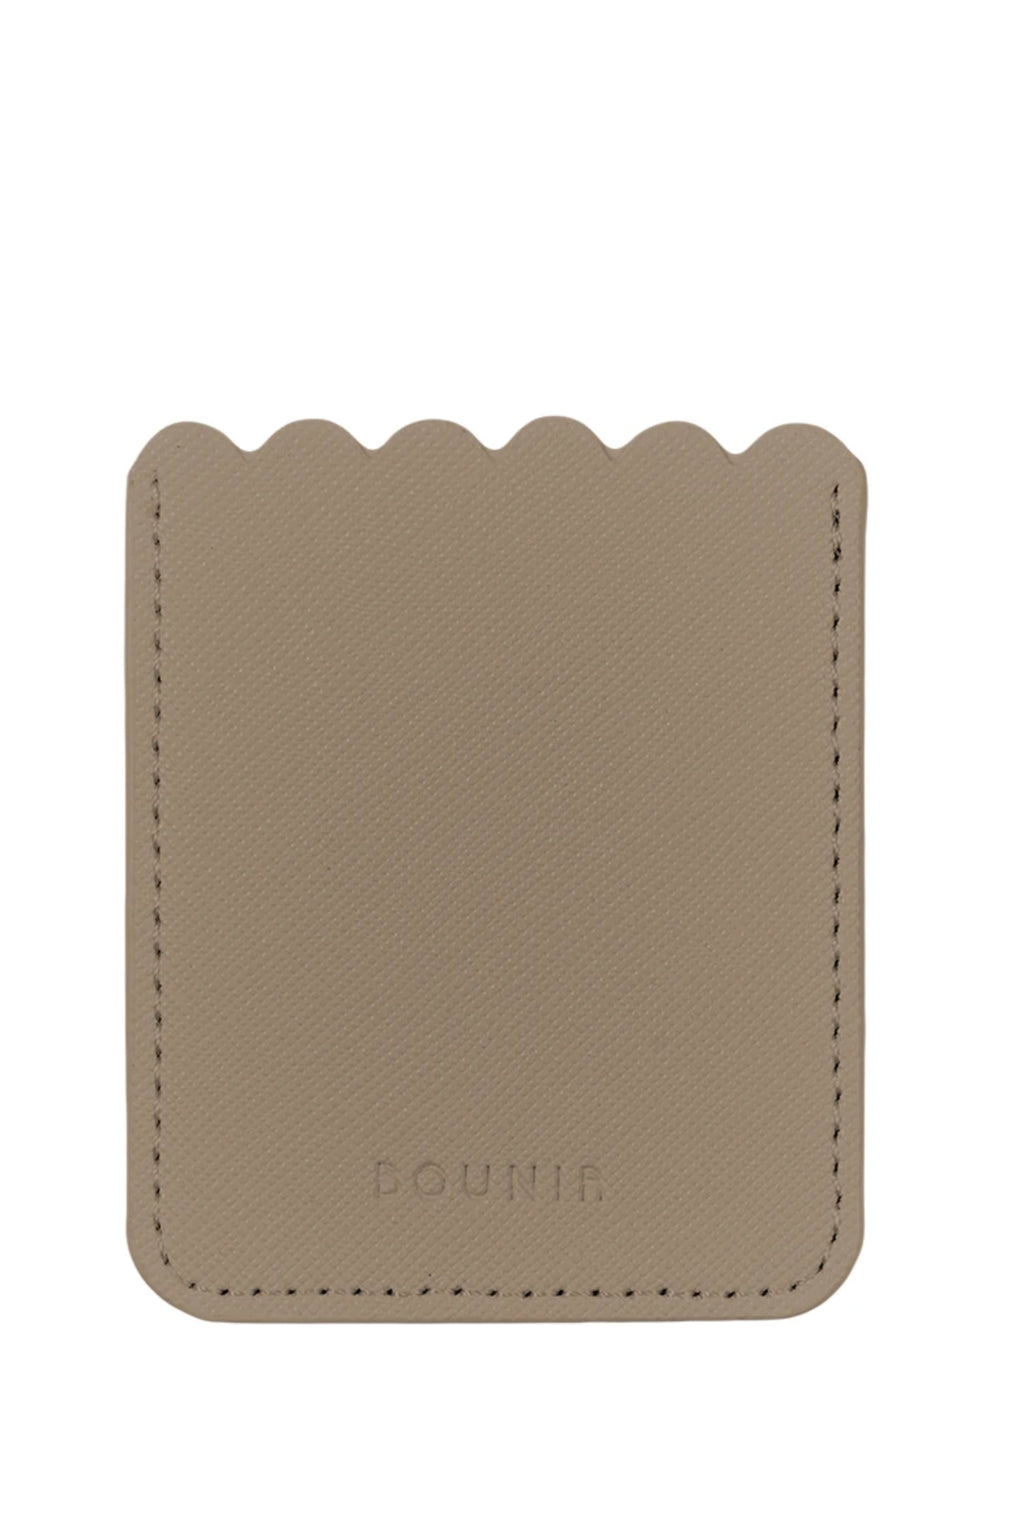 SCALLOP - taupe vegan leather pocket